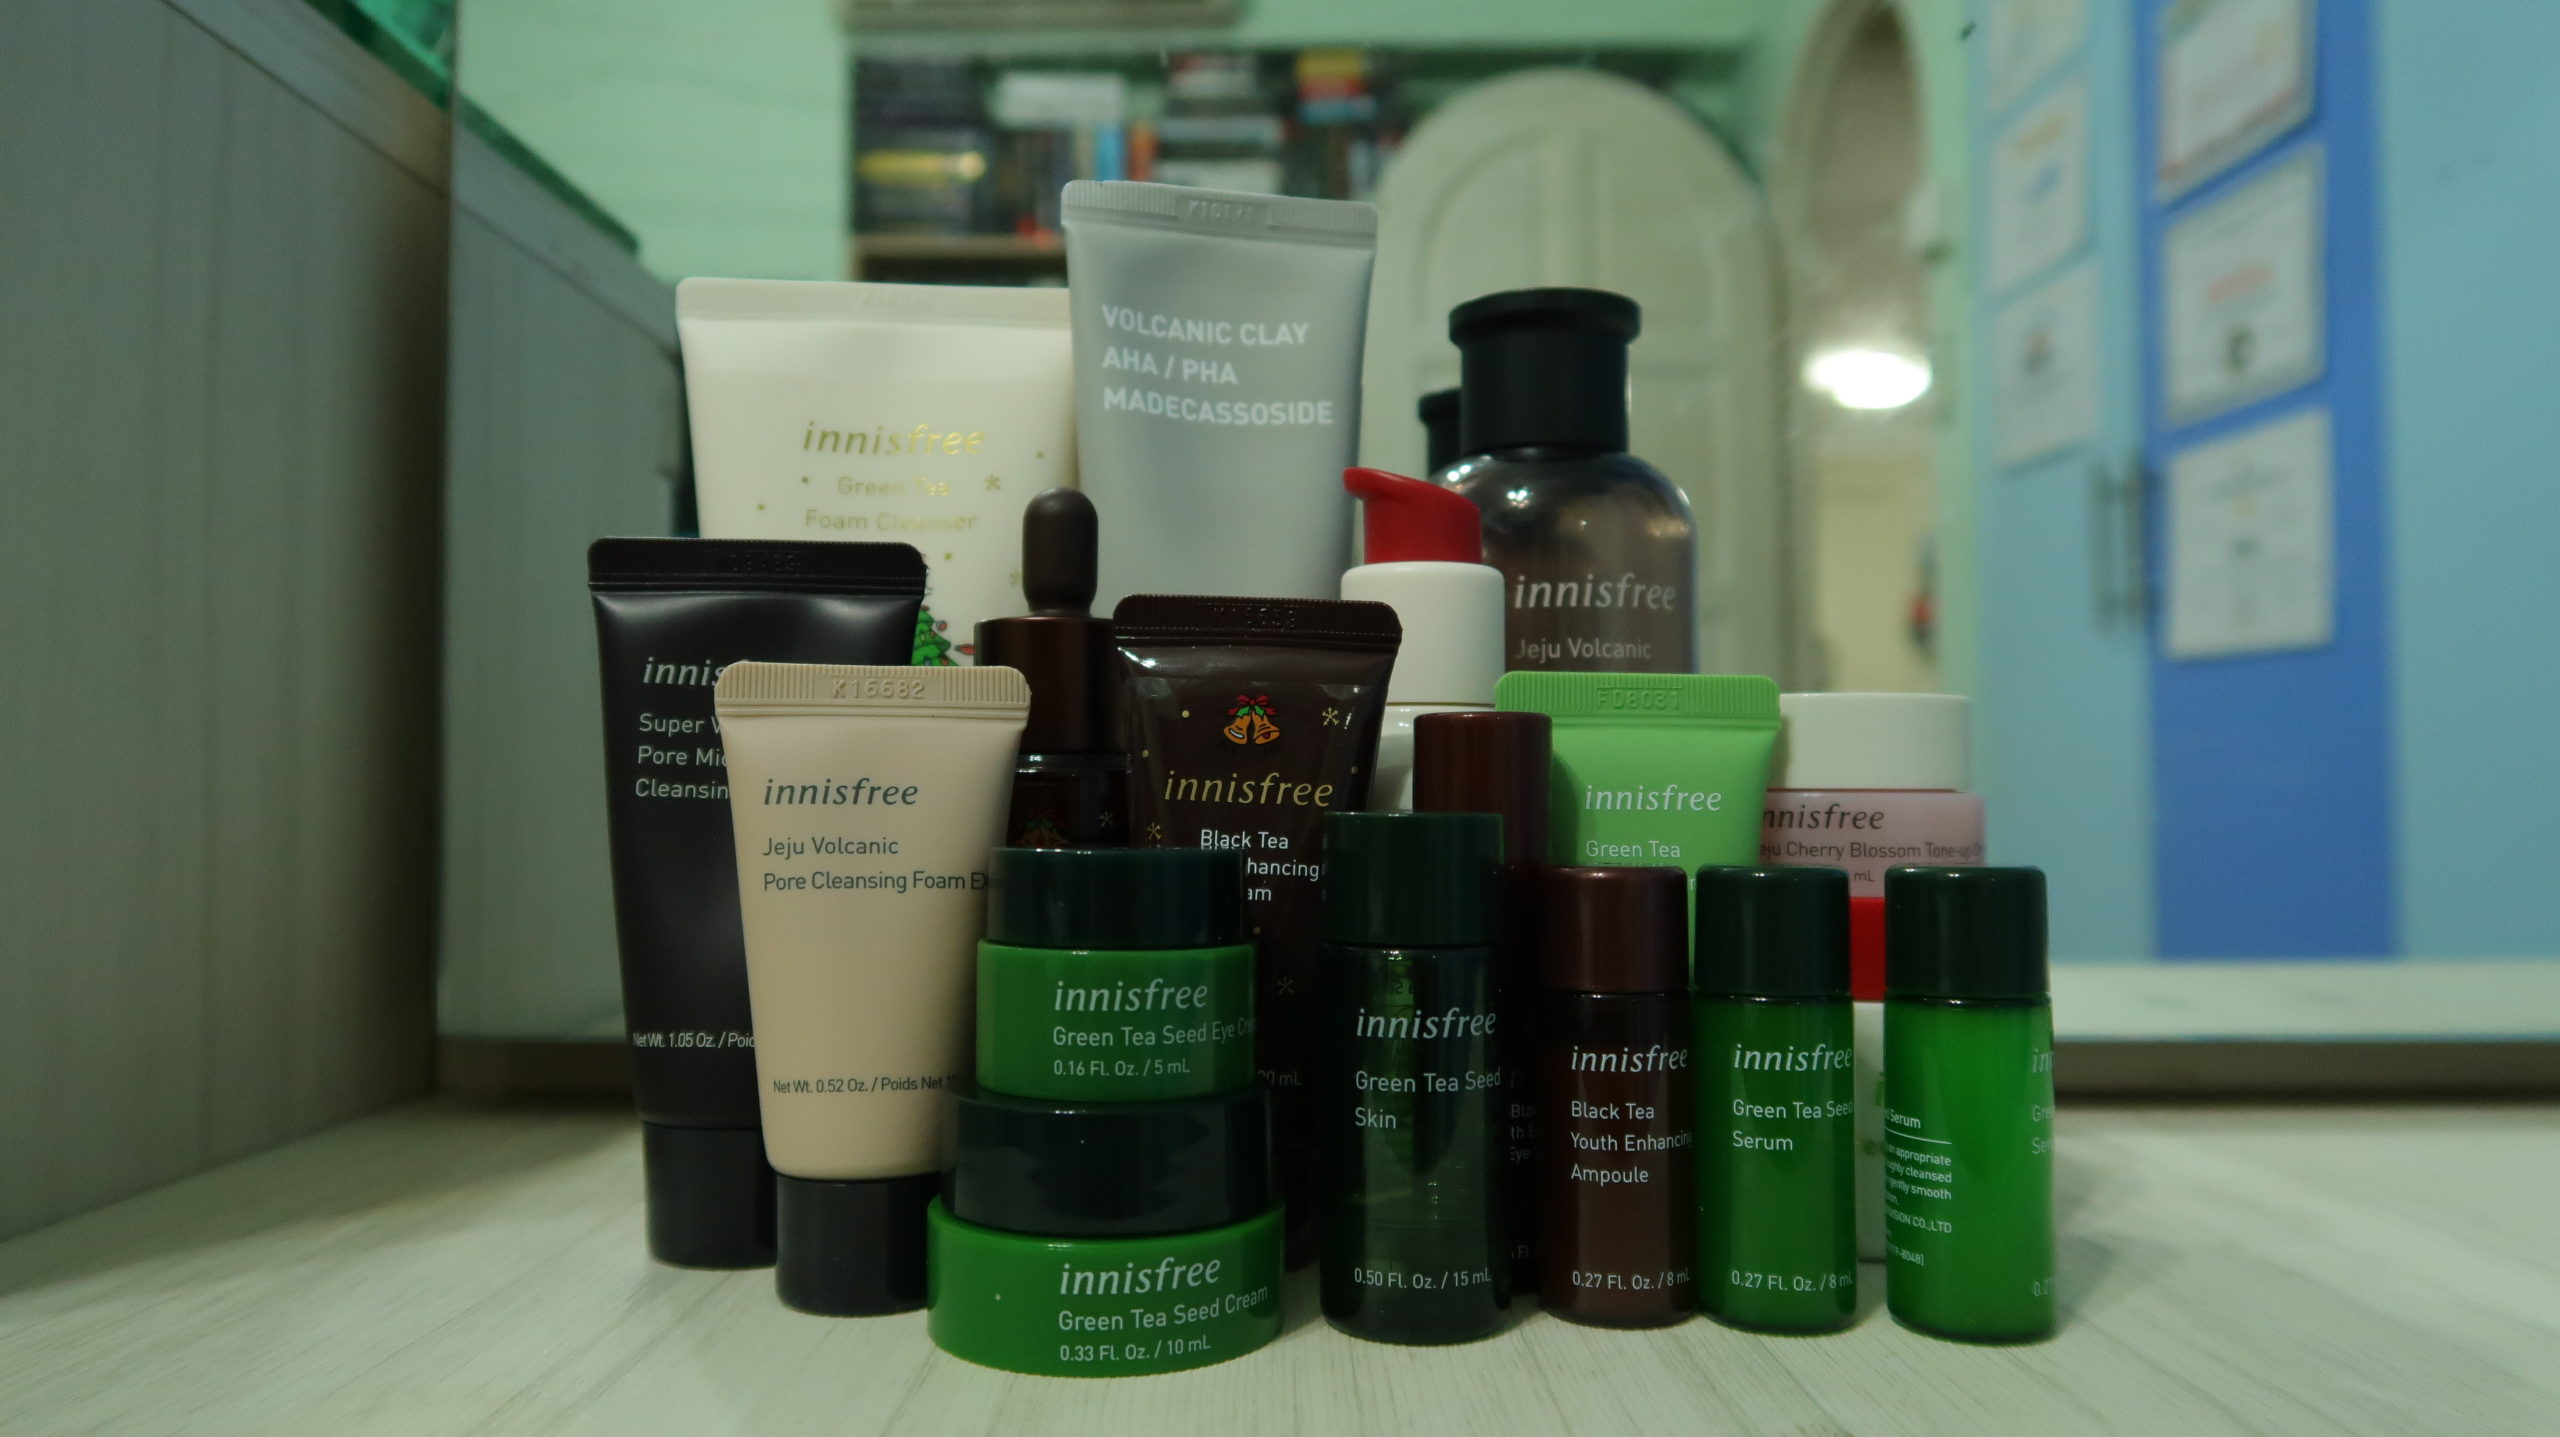 innisfree skincare products